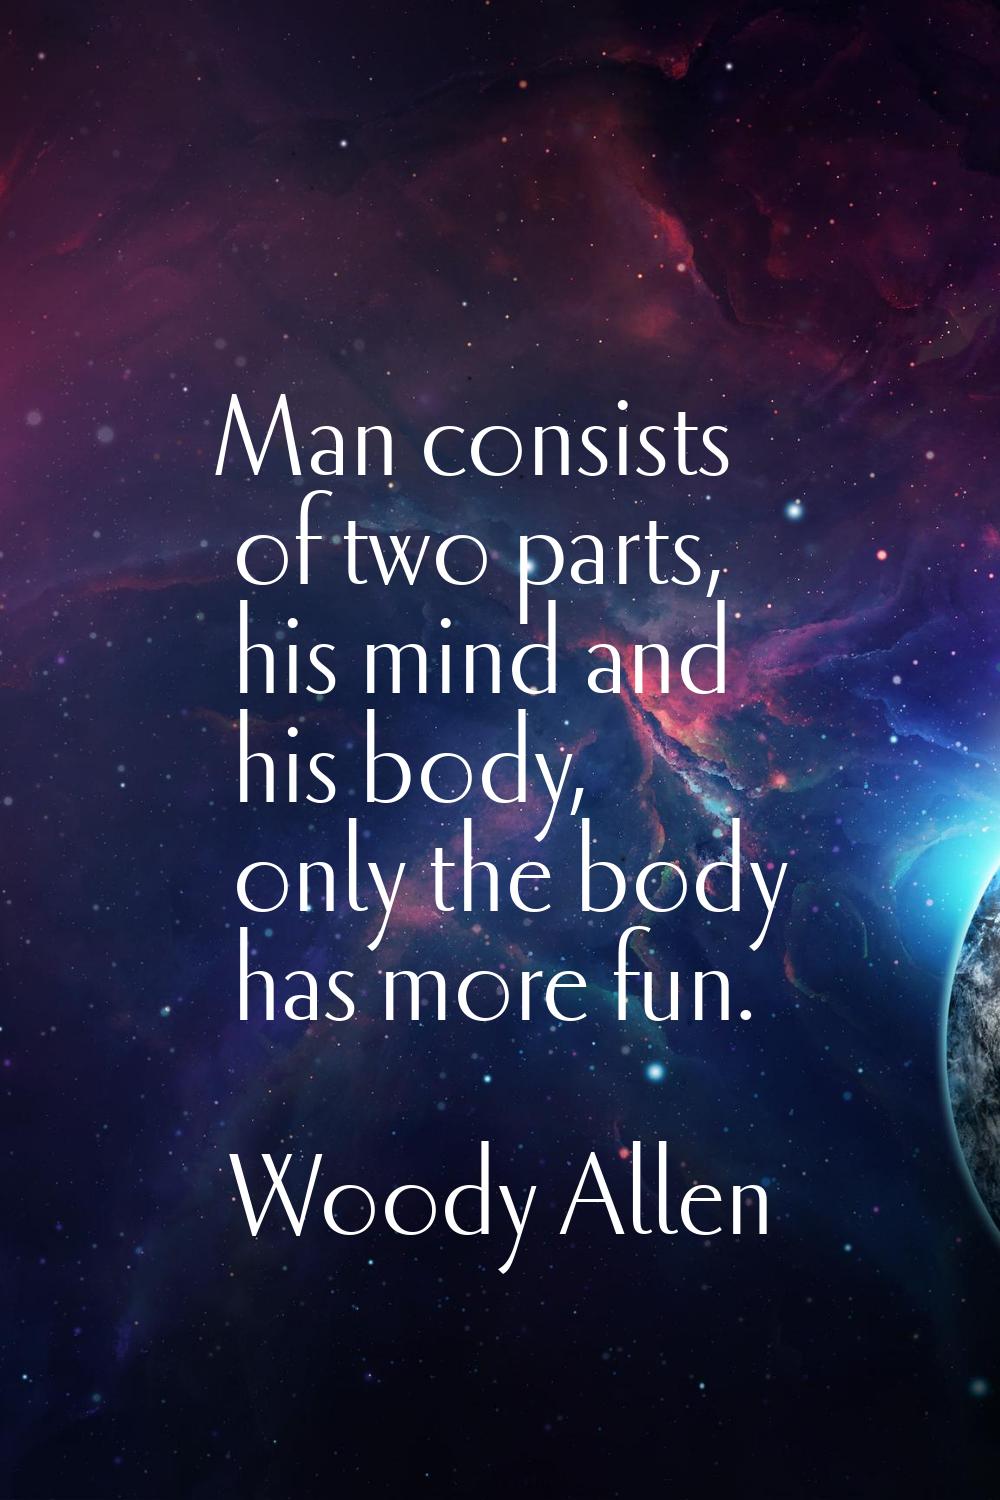 Man consists of two parts, his mind and his body, only the body has more fun.